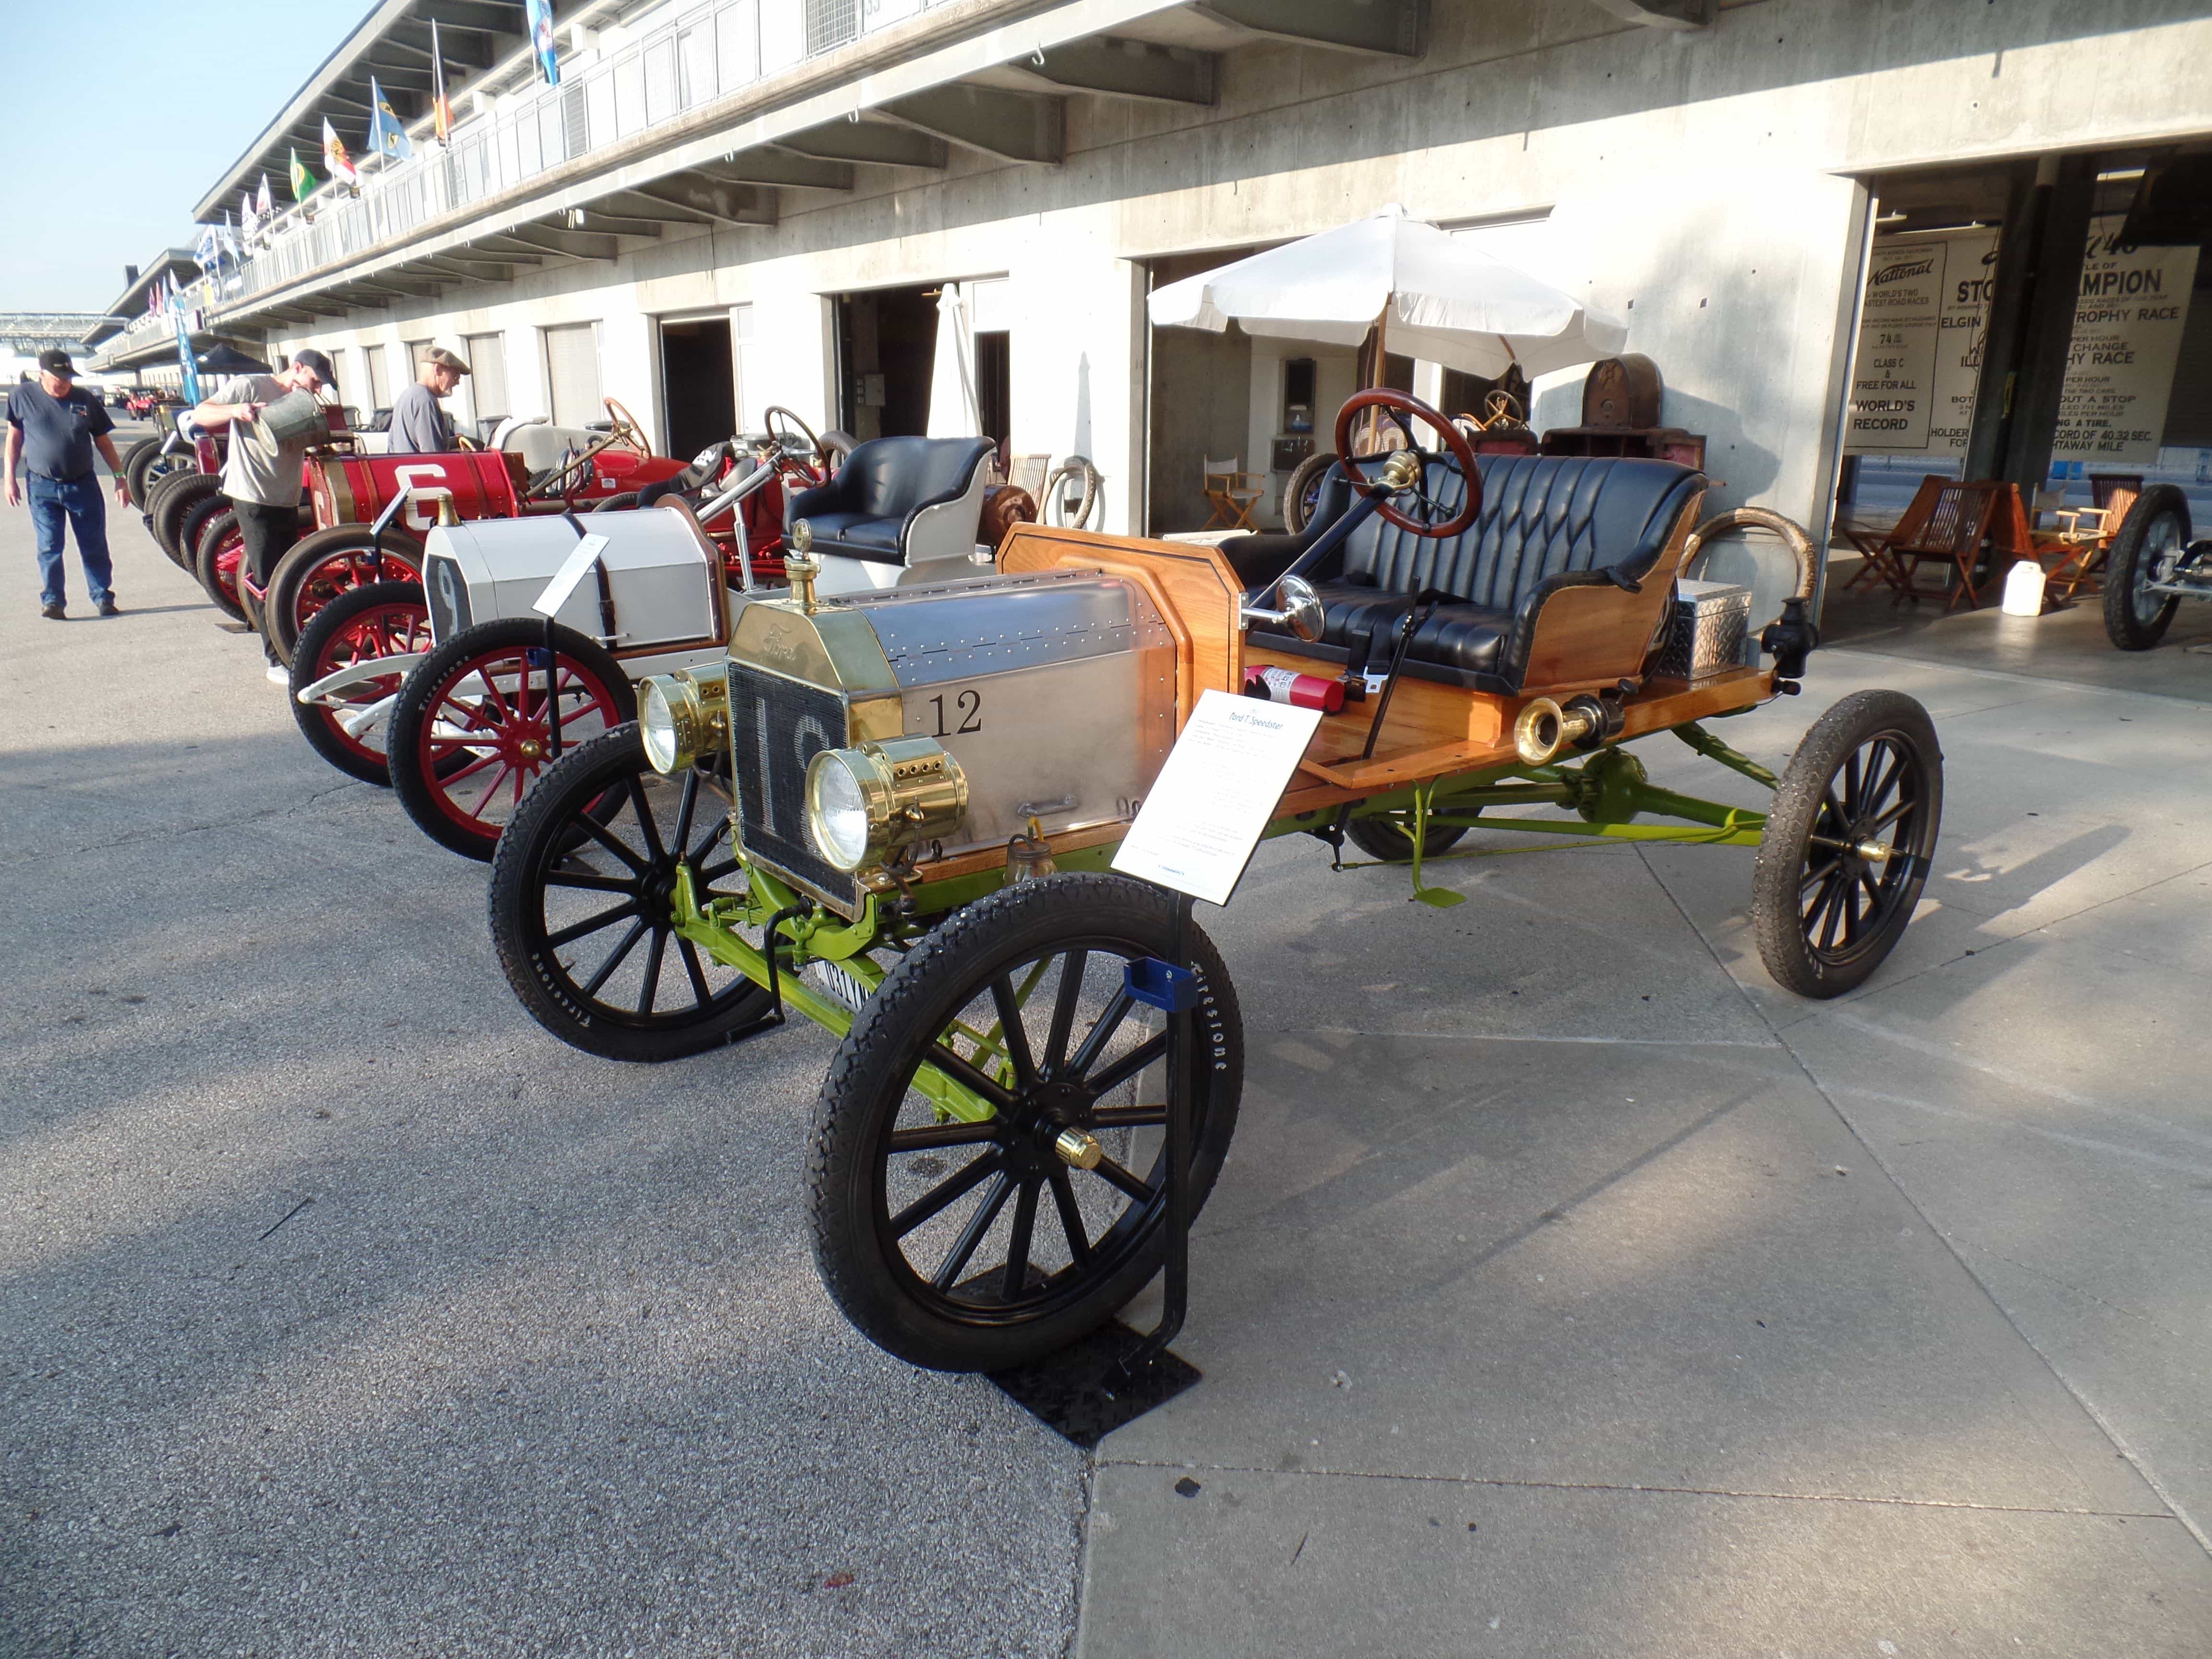 2019 8 Ragtime Racers at SVRA Brickyard Indianapolis Archives Chuck's